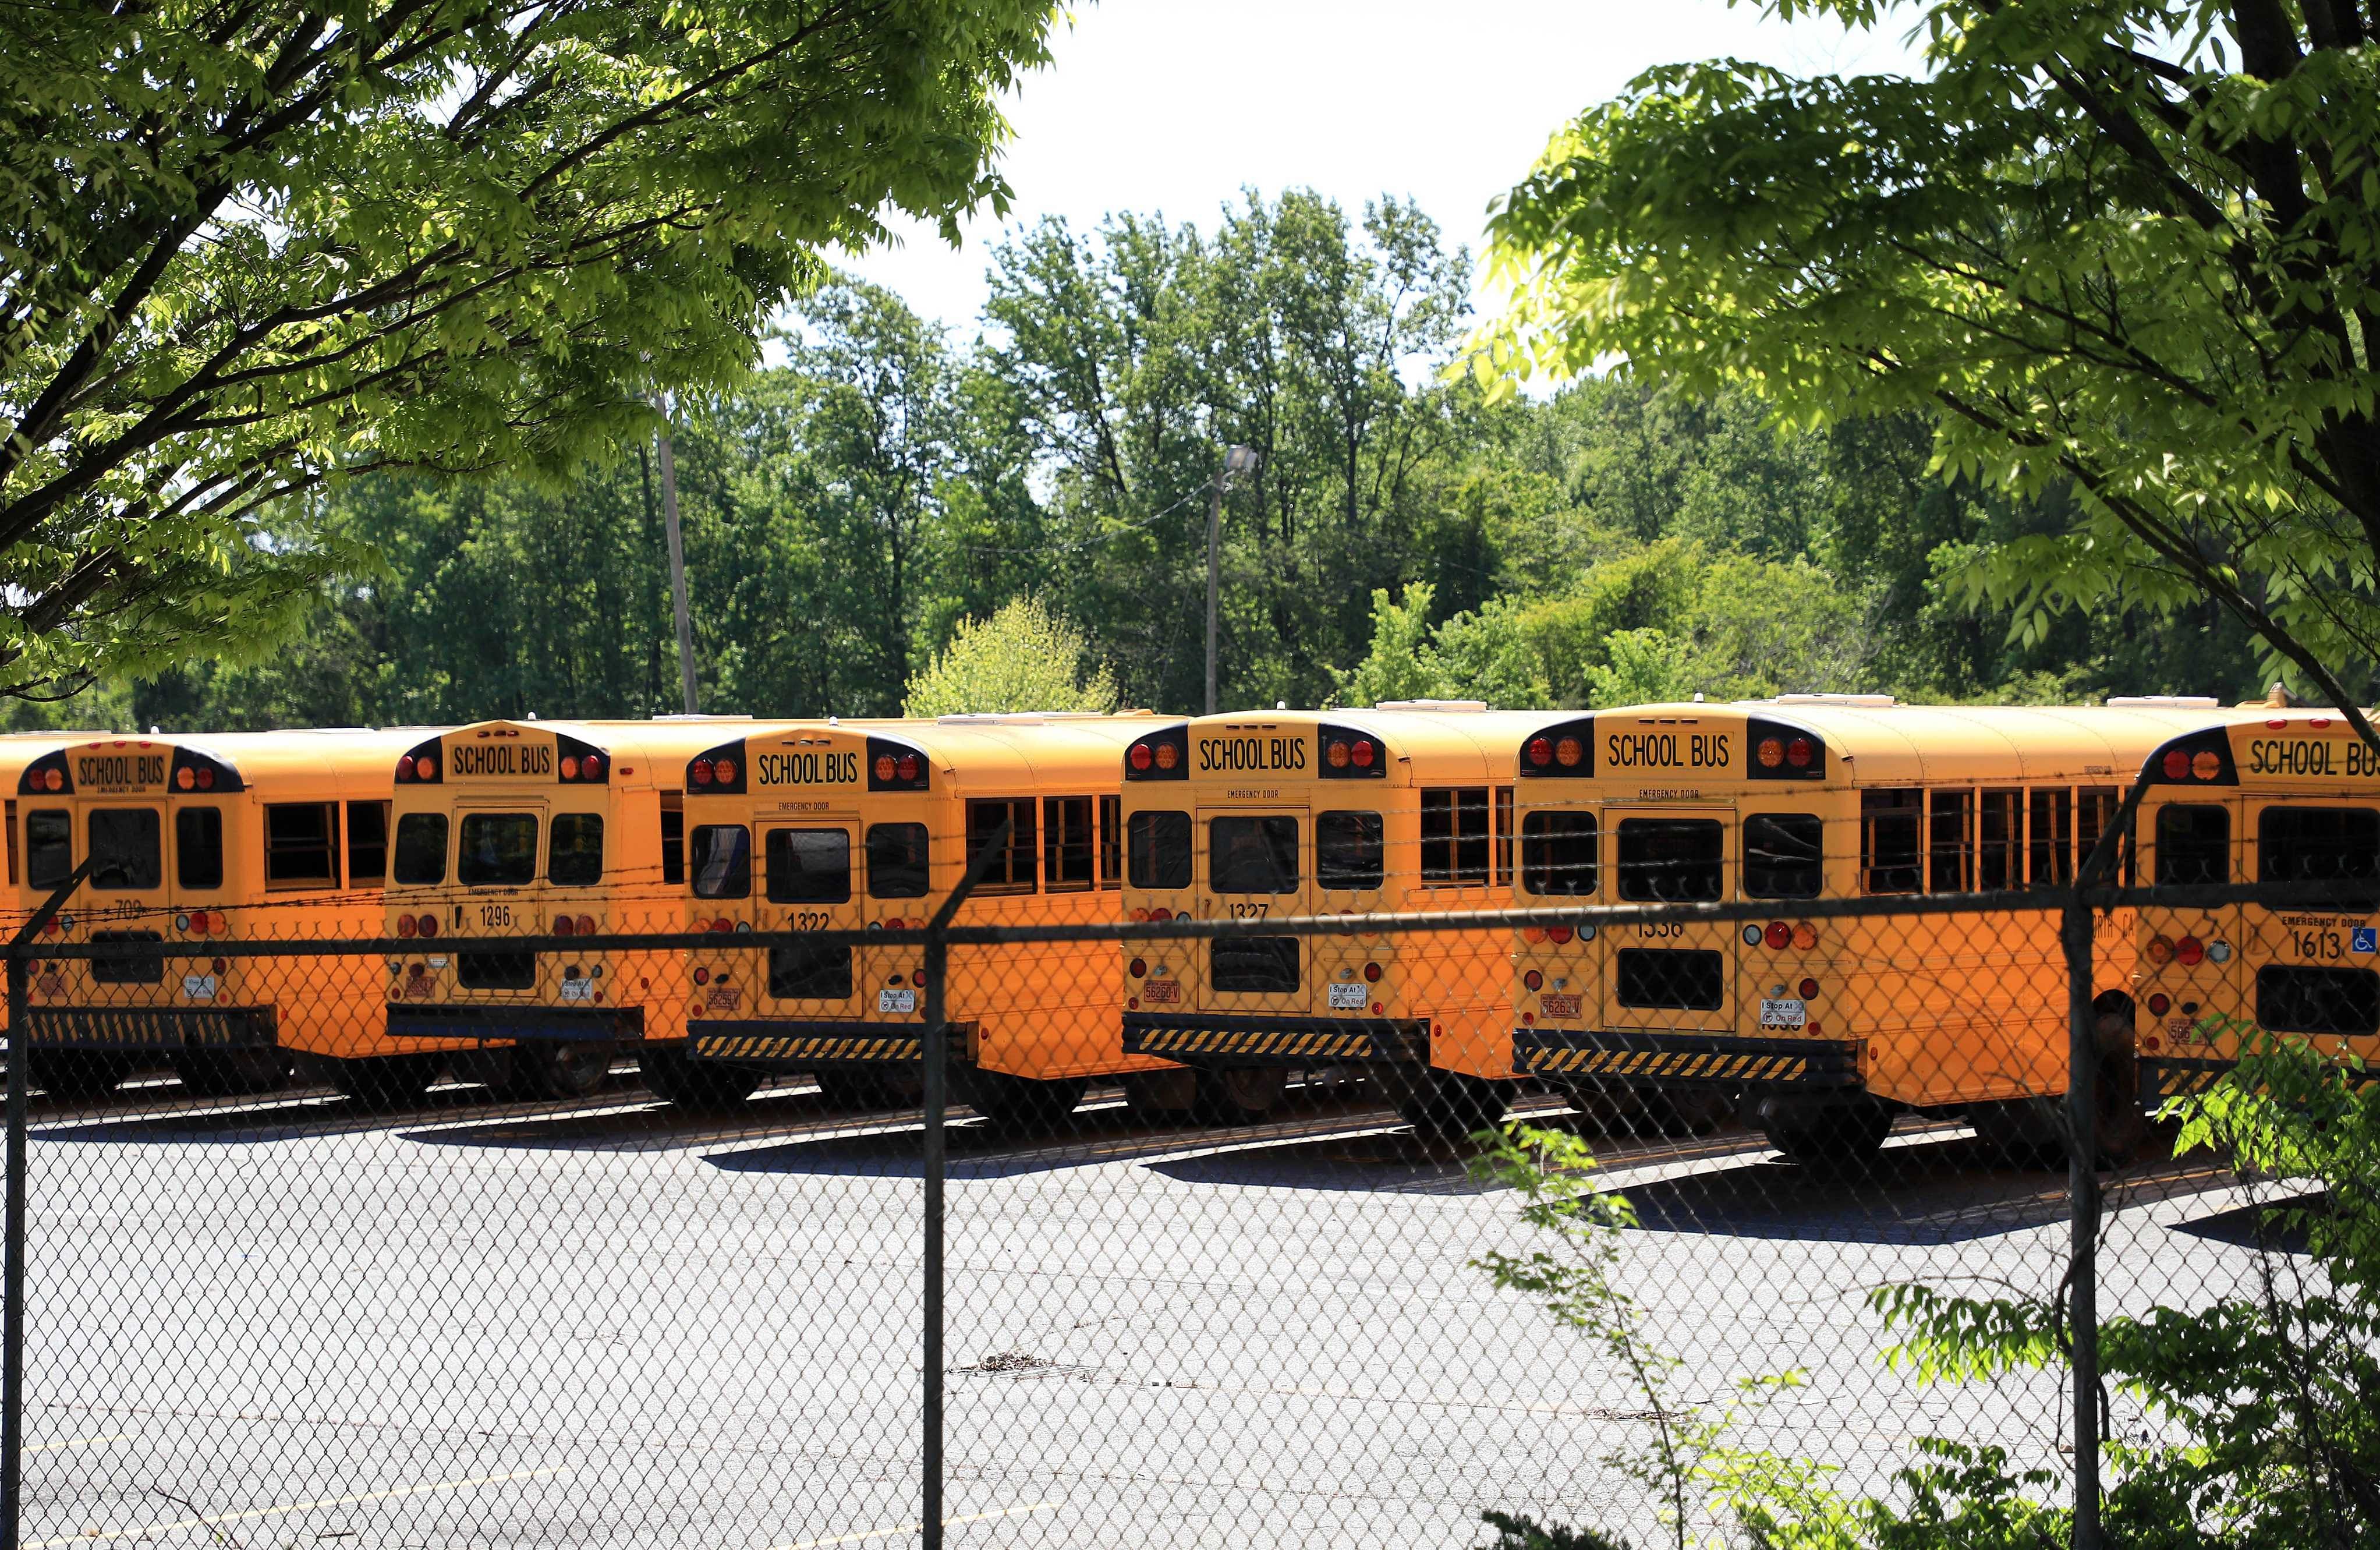 Parked school busses sit in a lot during the coronavirus (COVID-19) pandemic in Charlotte, North Carolina. (AFP)